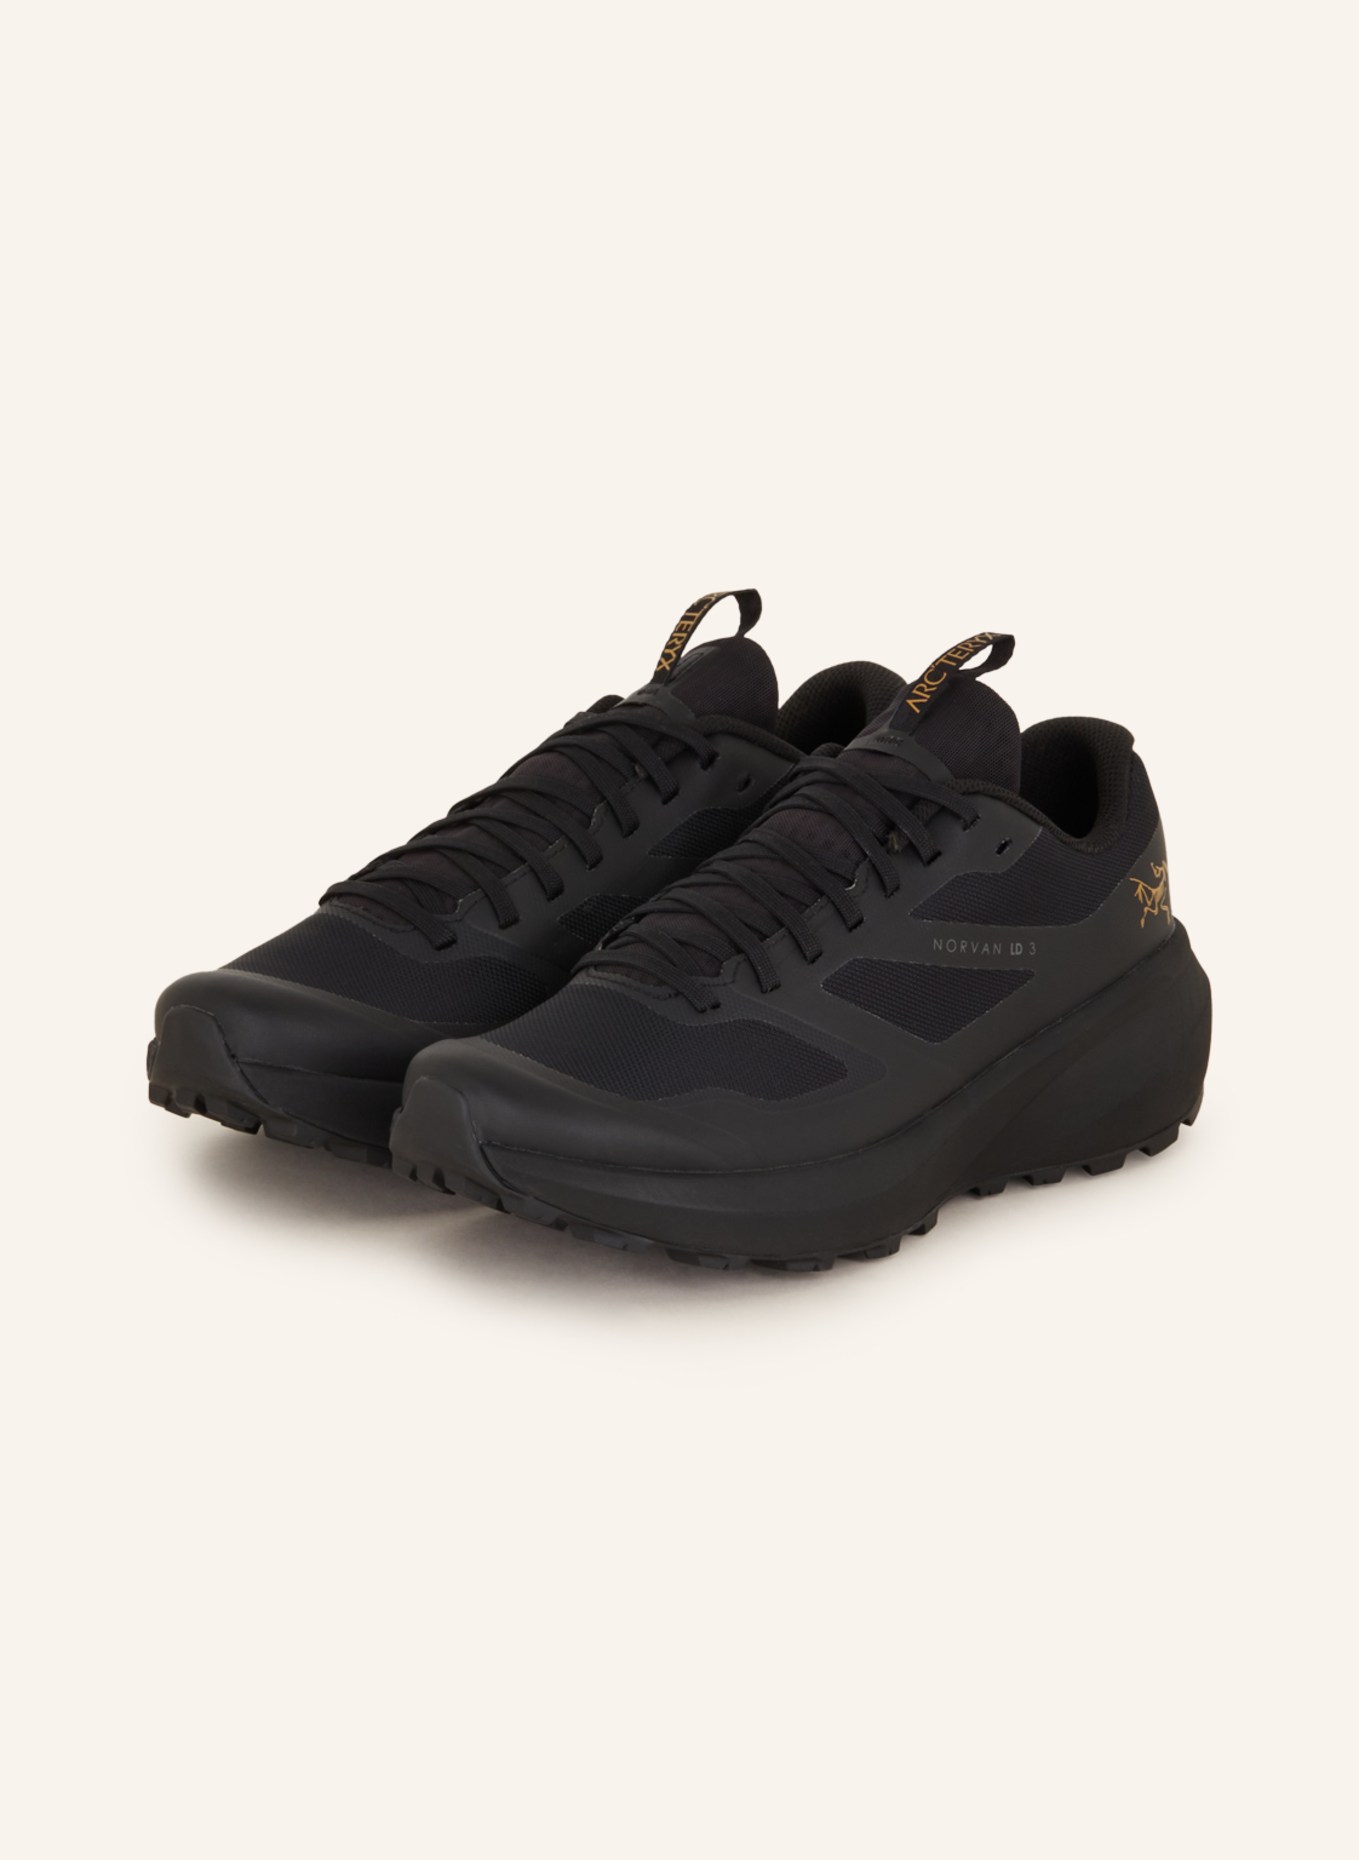 ARC'TERYX Trail running shoes NORVAN LD 3 GTX, Color: BLACK (Image 1)